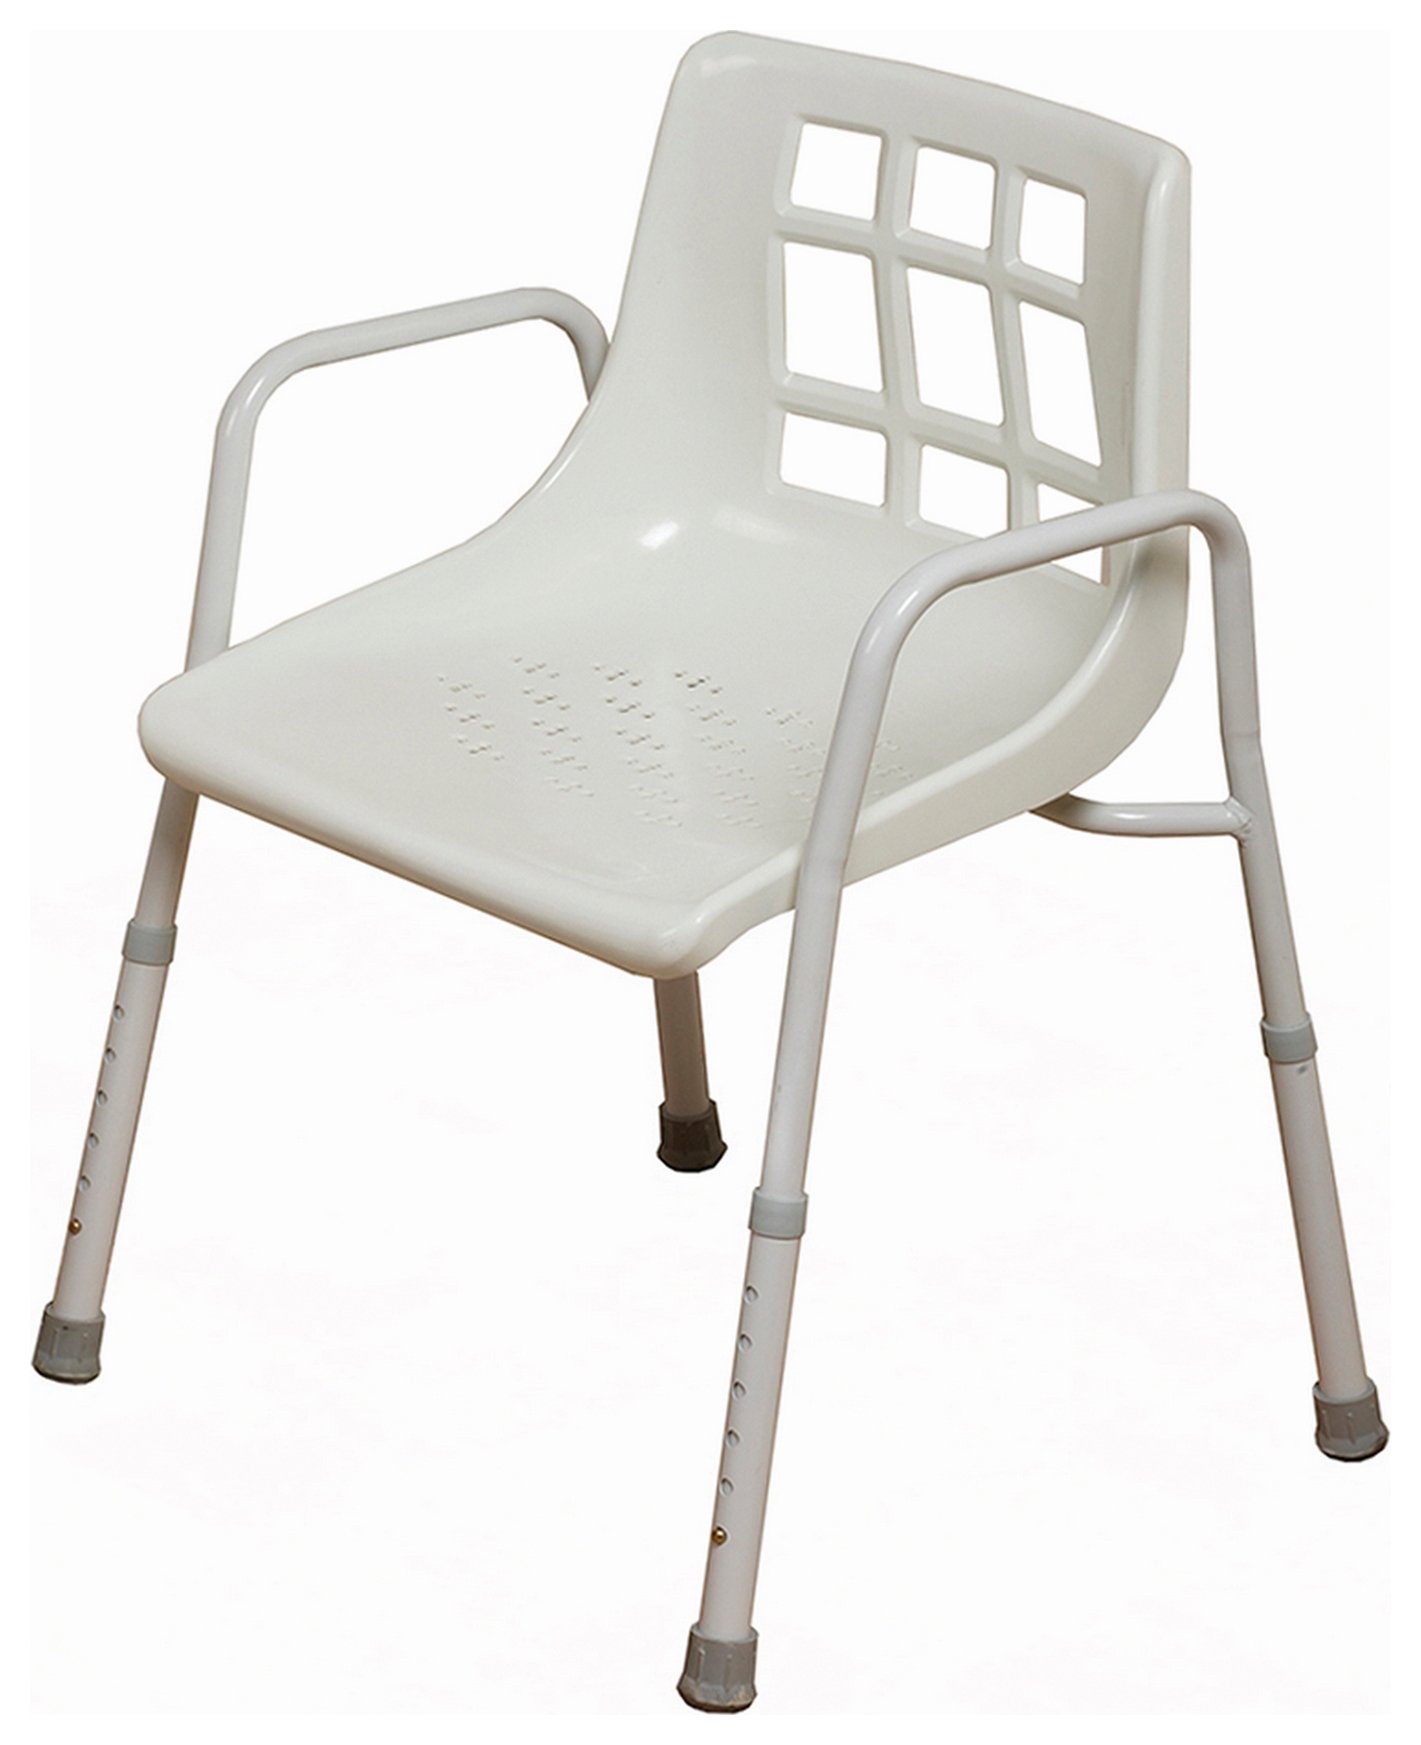 NRS Height Adjustable Shower Chair